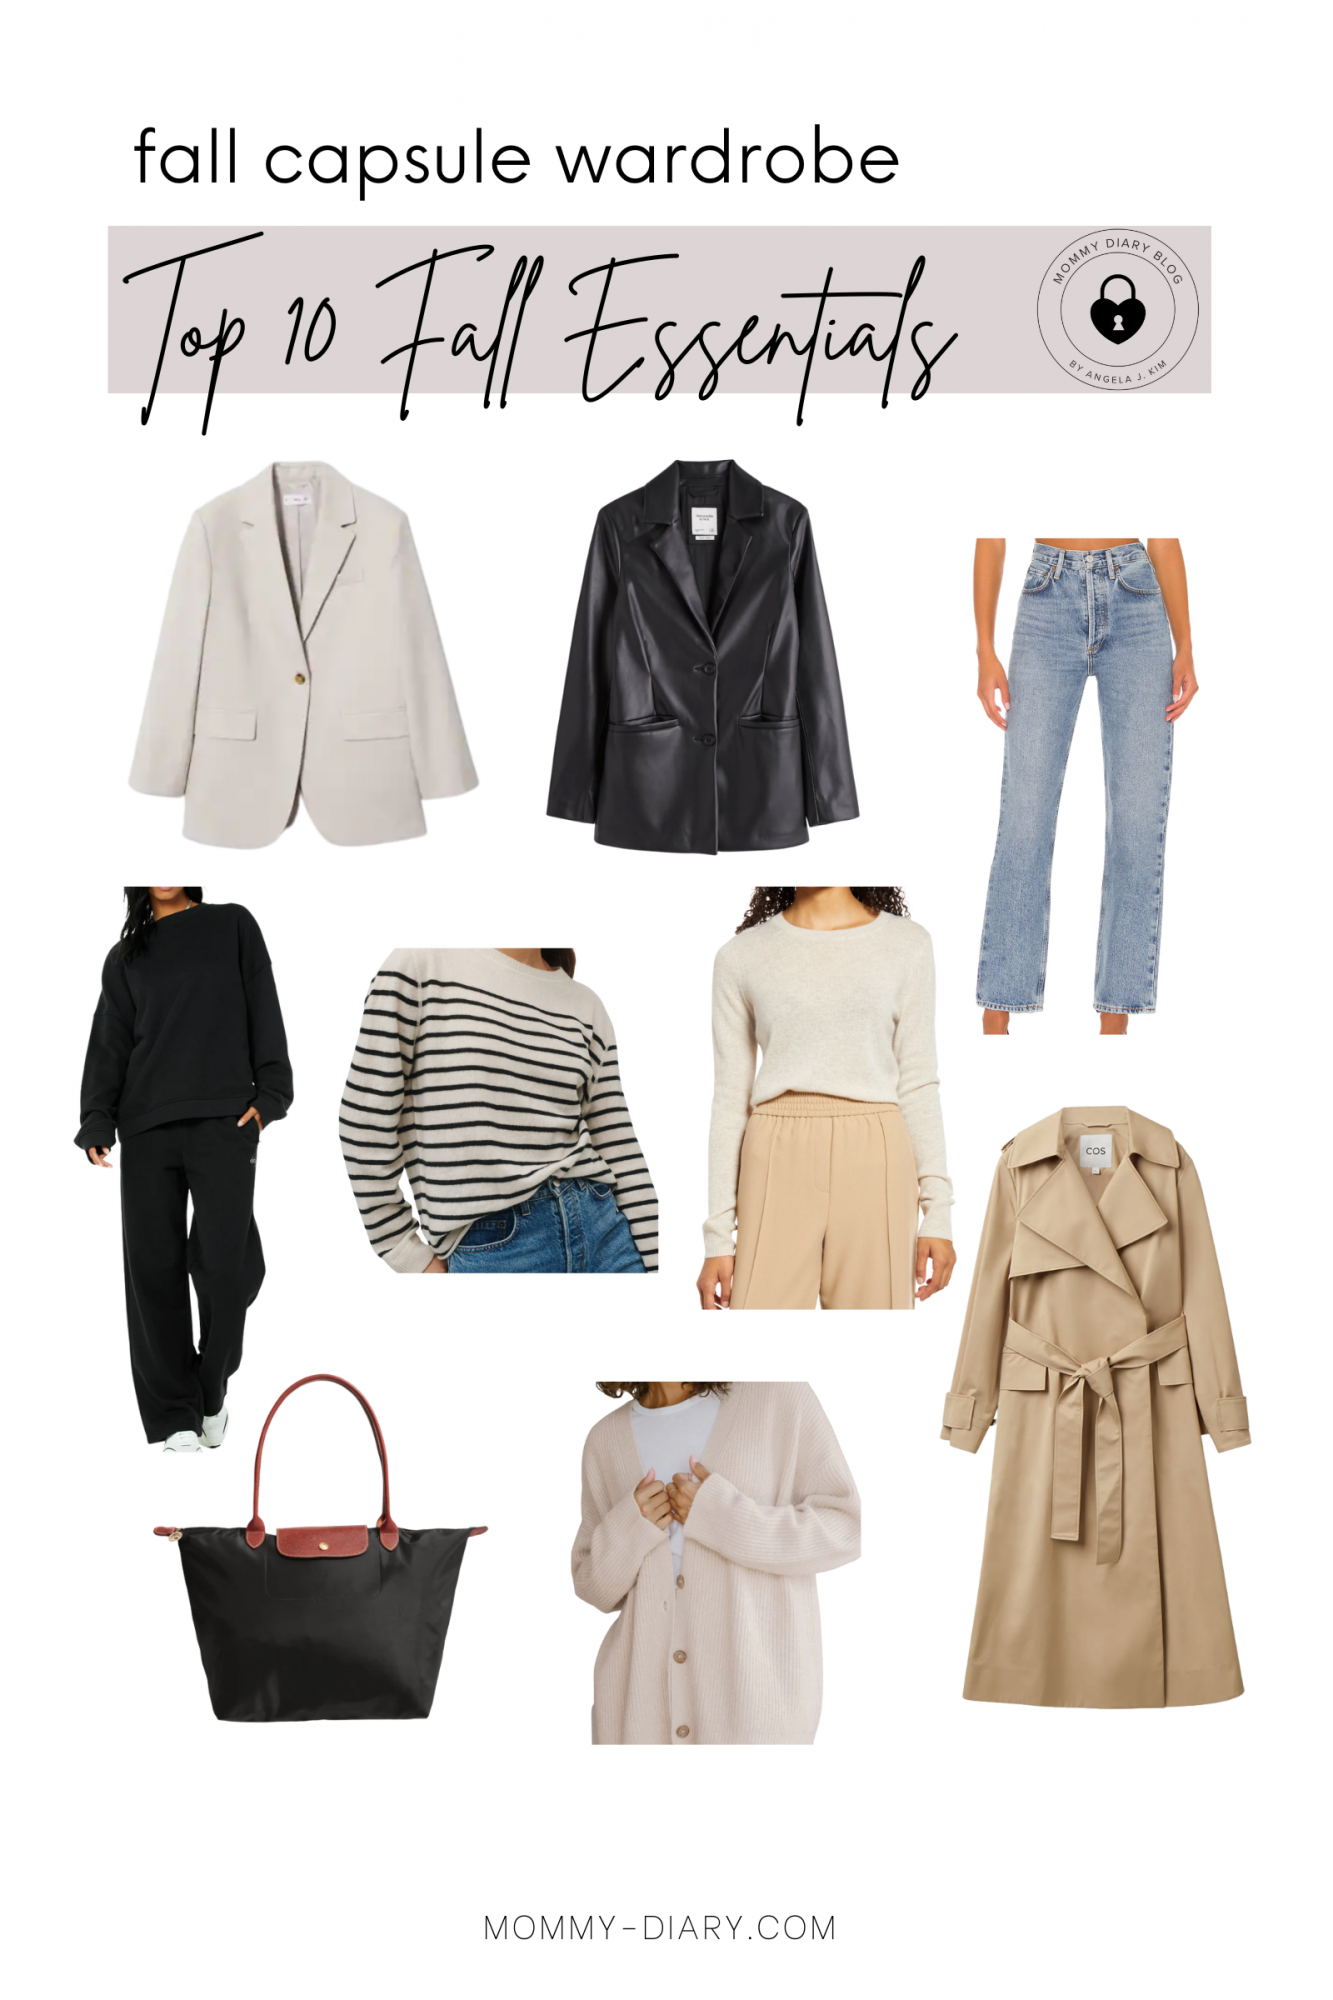 COZY CAPSULE WARDROBE  COMFY CASUAL OUTFITS ON TREND WHEN YOUR